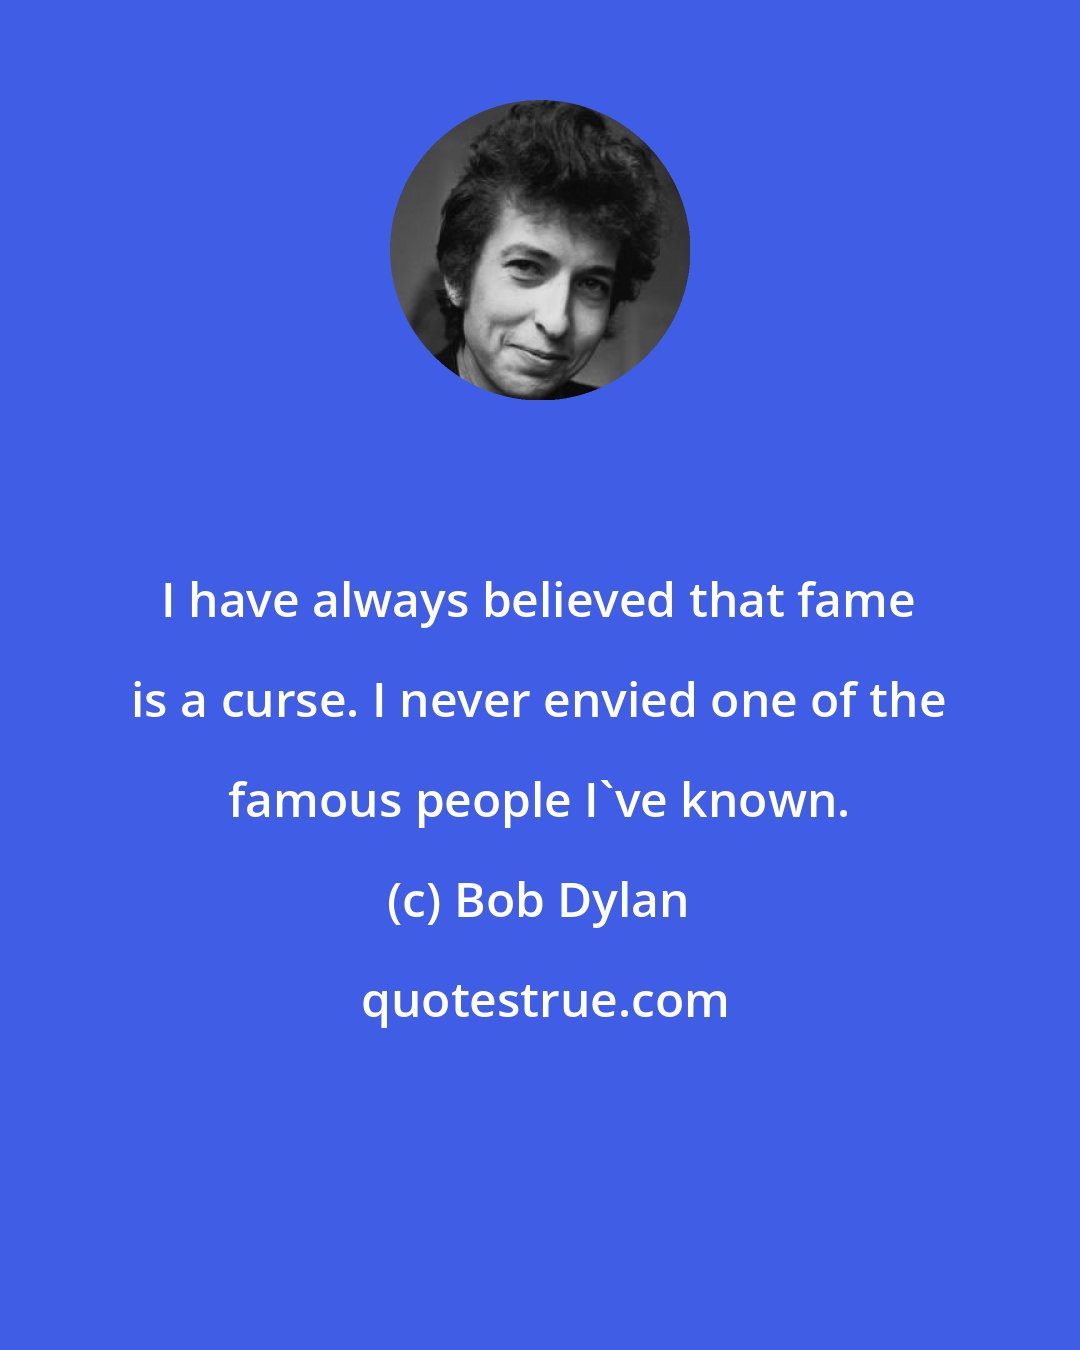 Bob Dylan: I have always believed that fame is a curse. I never envied one of the famous people I've known.